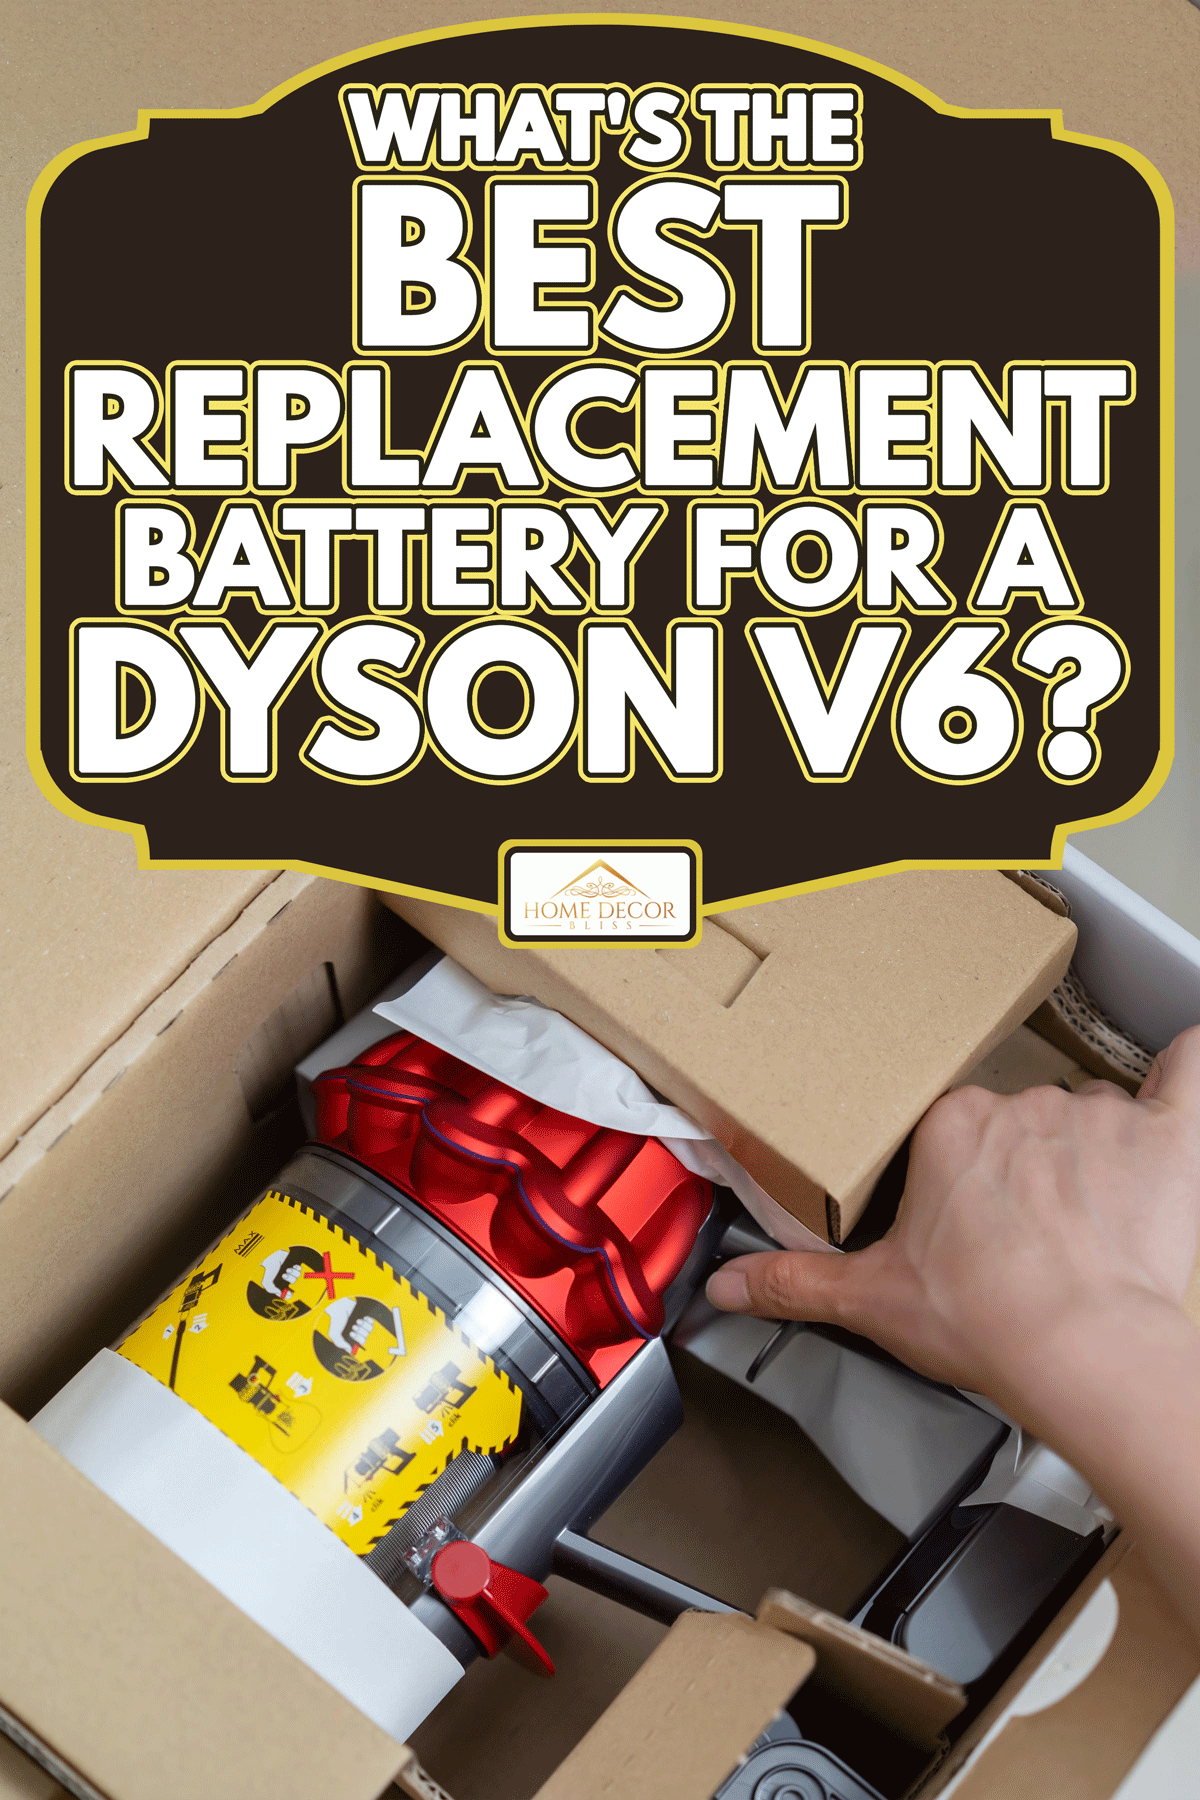 A brand new dyson vacuum cleaner in the box container, What's The Best Replacement Battery For A Dyson V6?